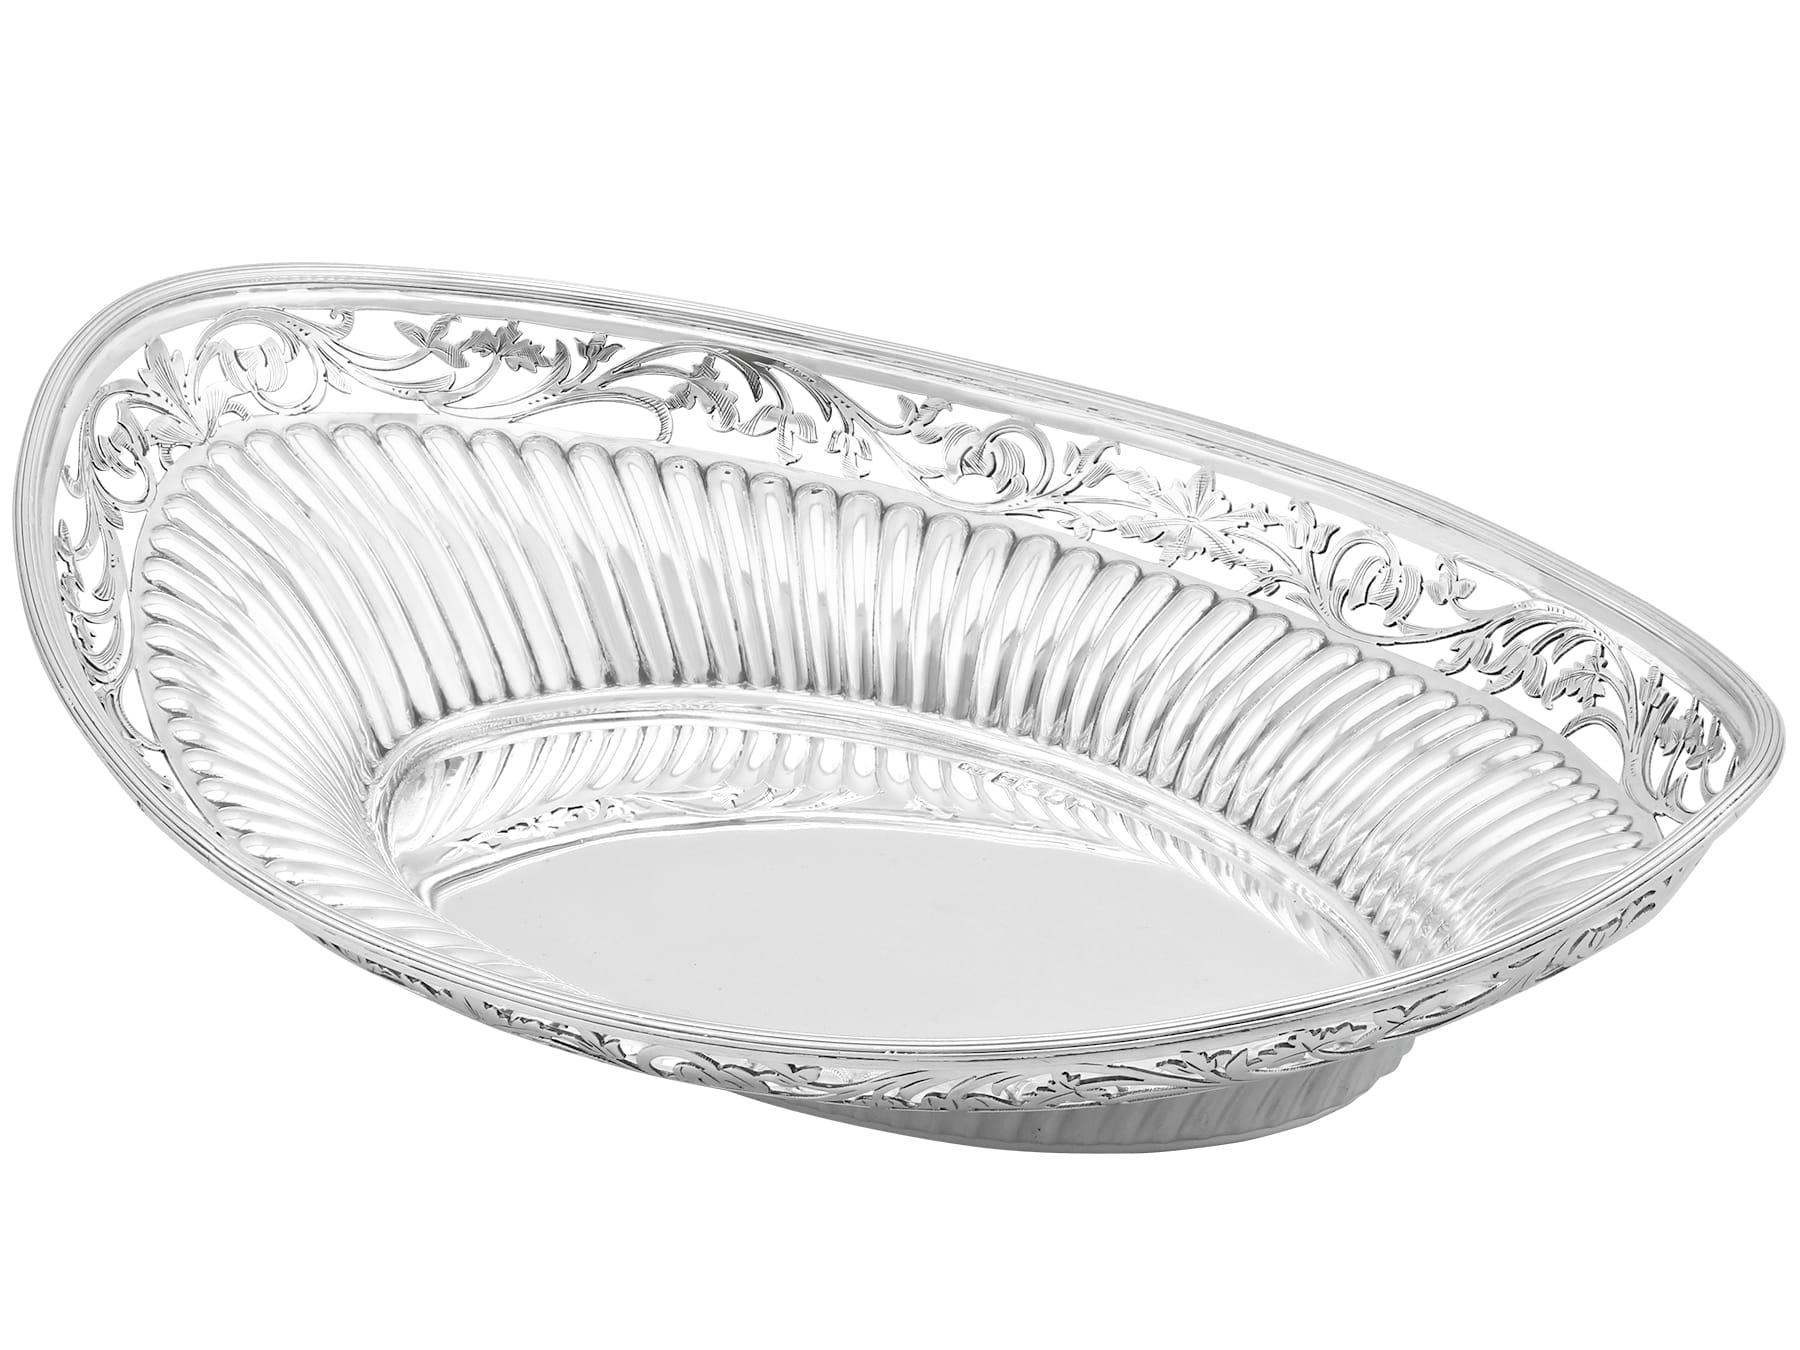 Antique Victorian Sterling Silver Bread Dish In Excellent Condition For Sale In Jesmond, Newcastle Upon Tyne